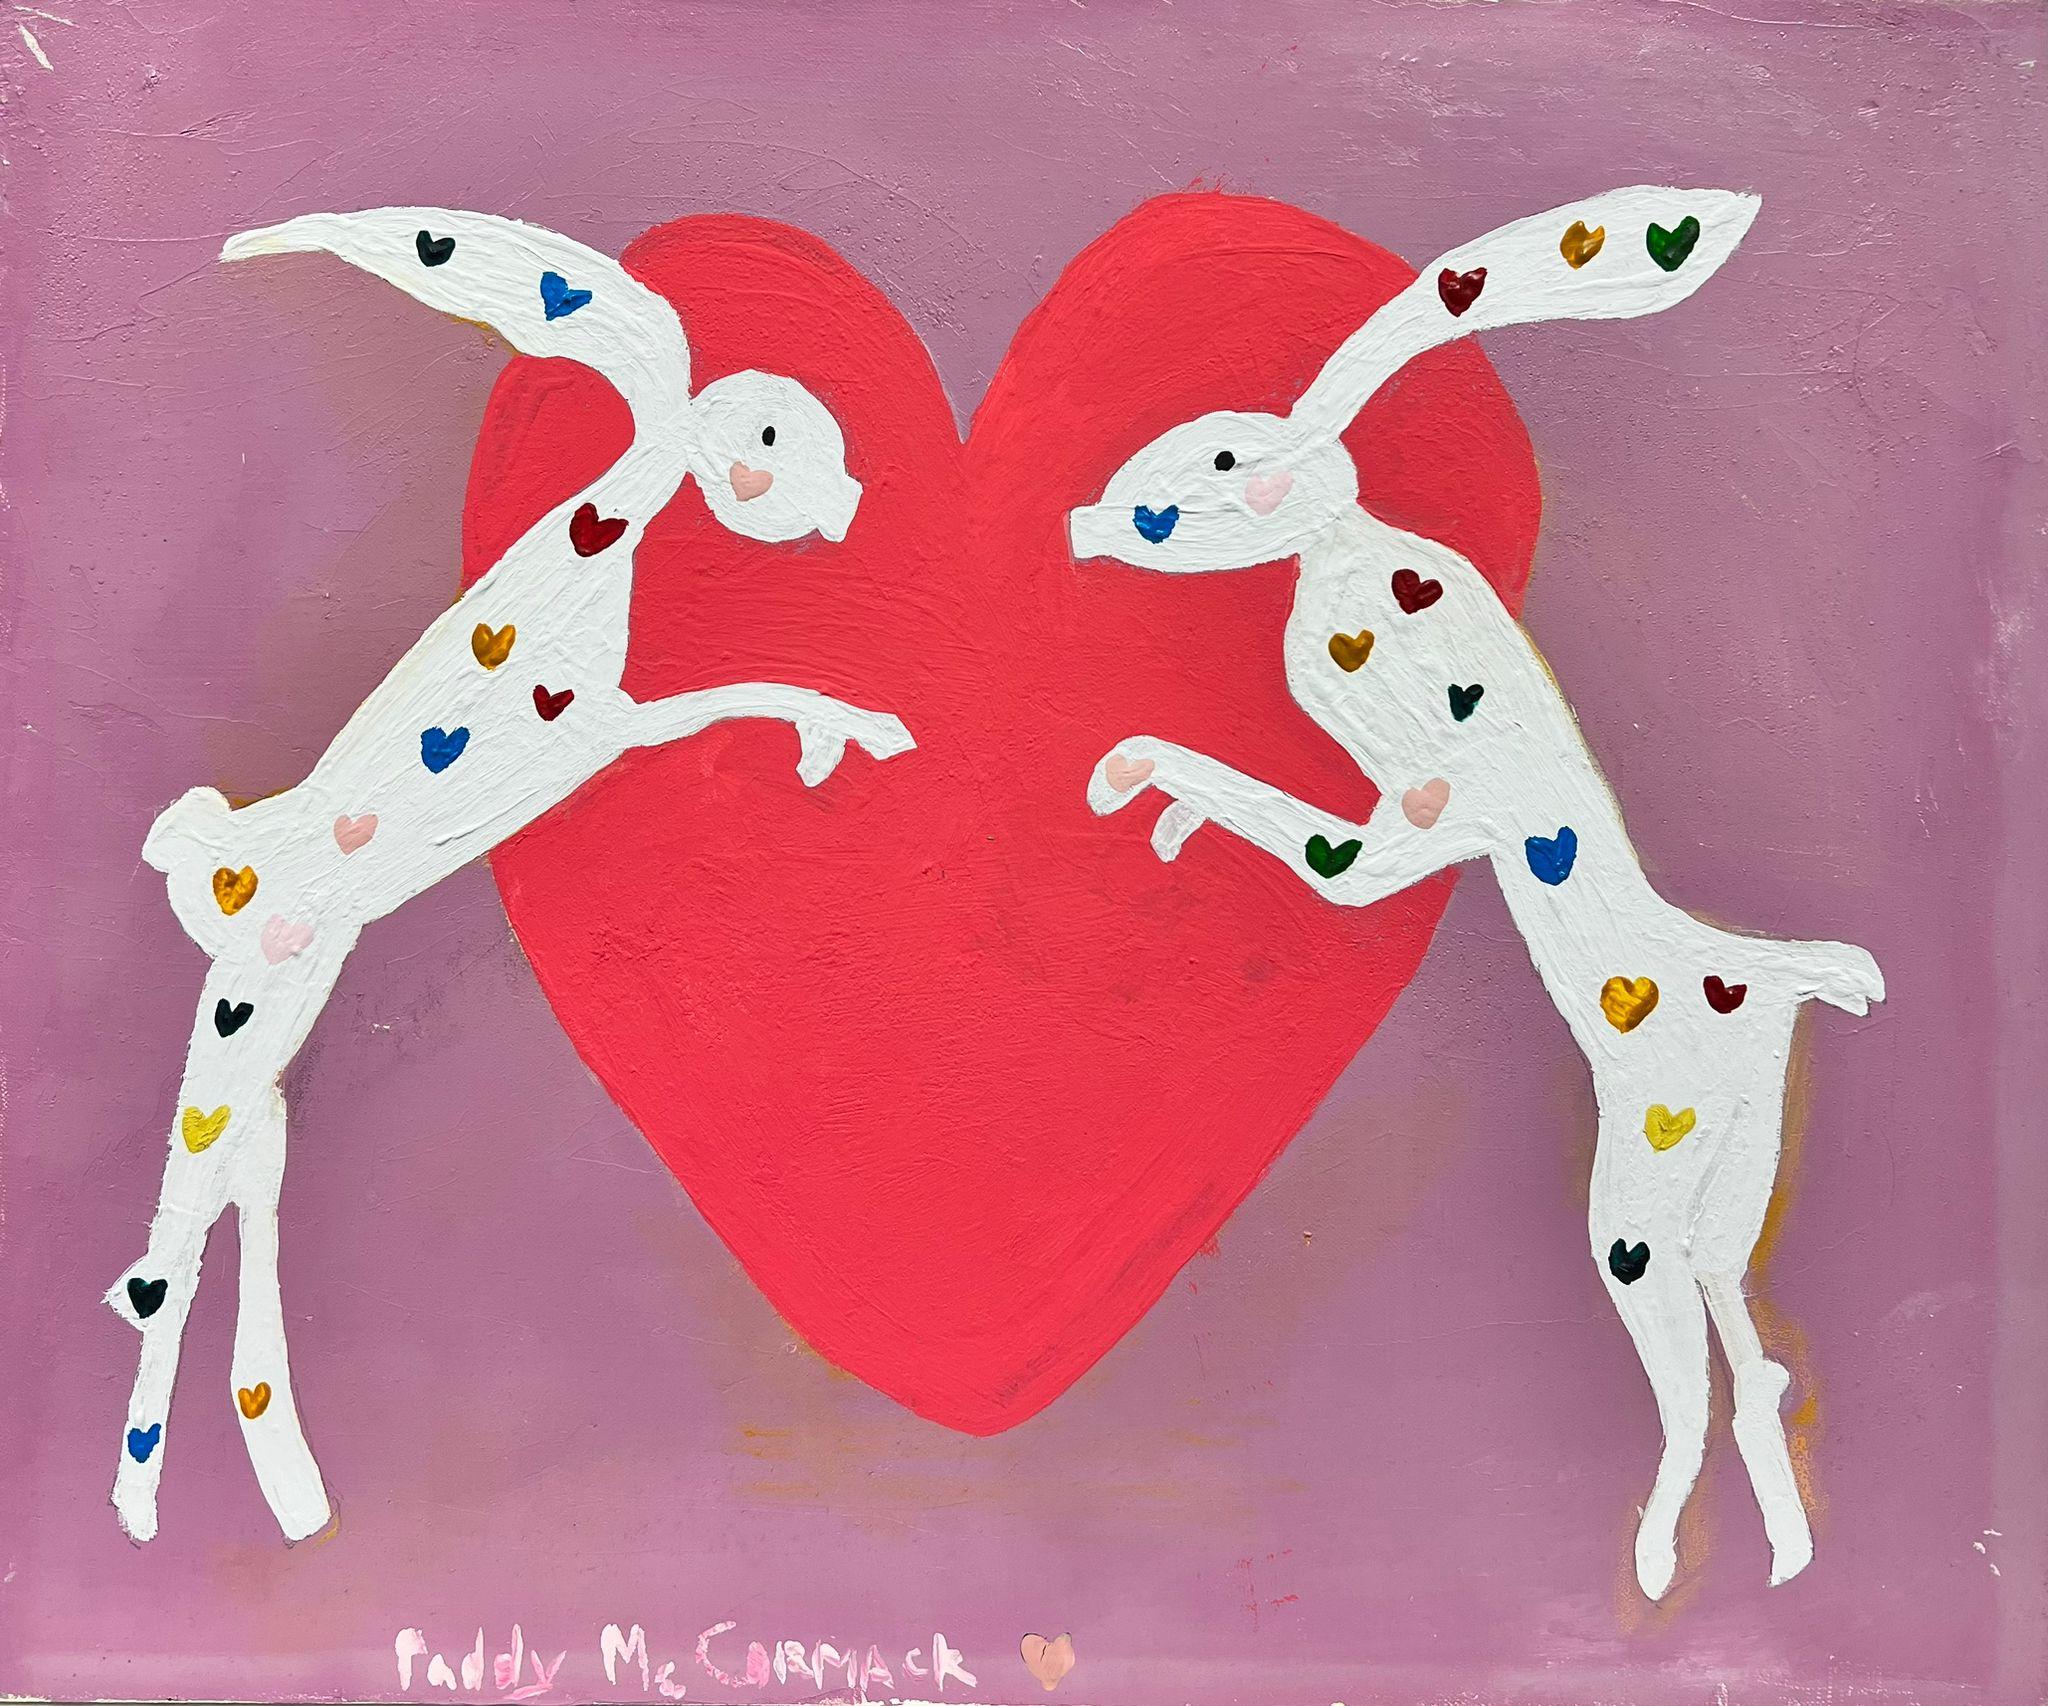 Irish contemporary Animal Art - March Hares Colorful Irish Contemporary Abstract Painting Pair Of Heart Hares